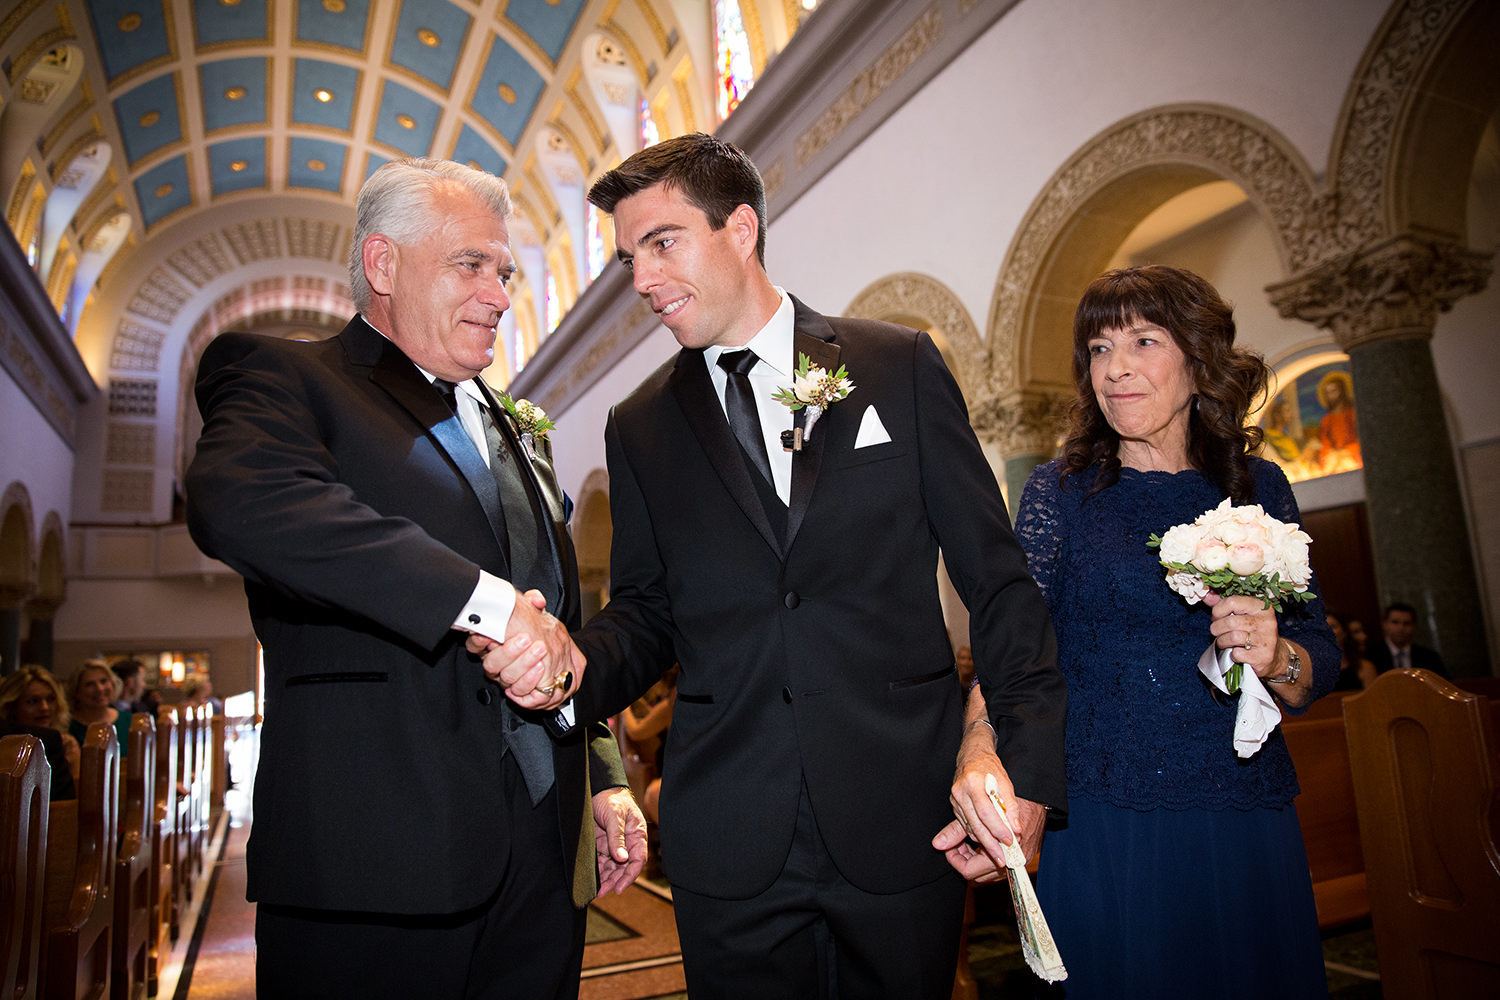 groom with his parents at ceremony